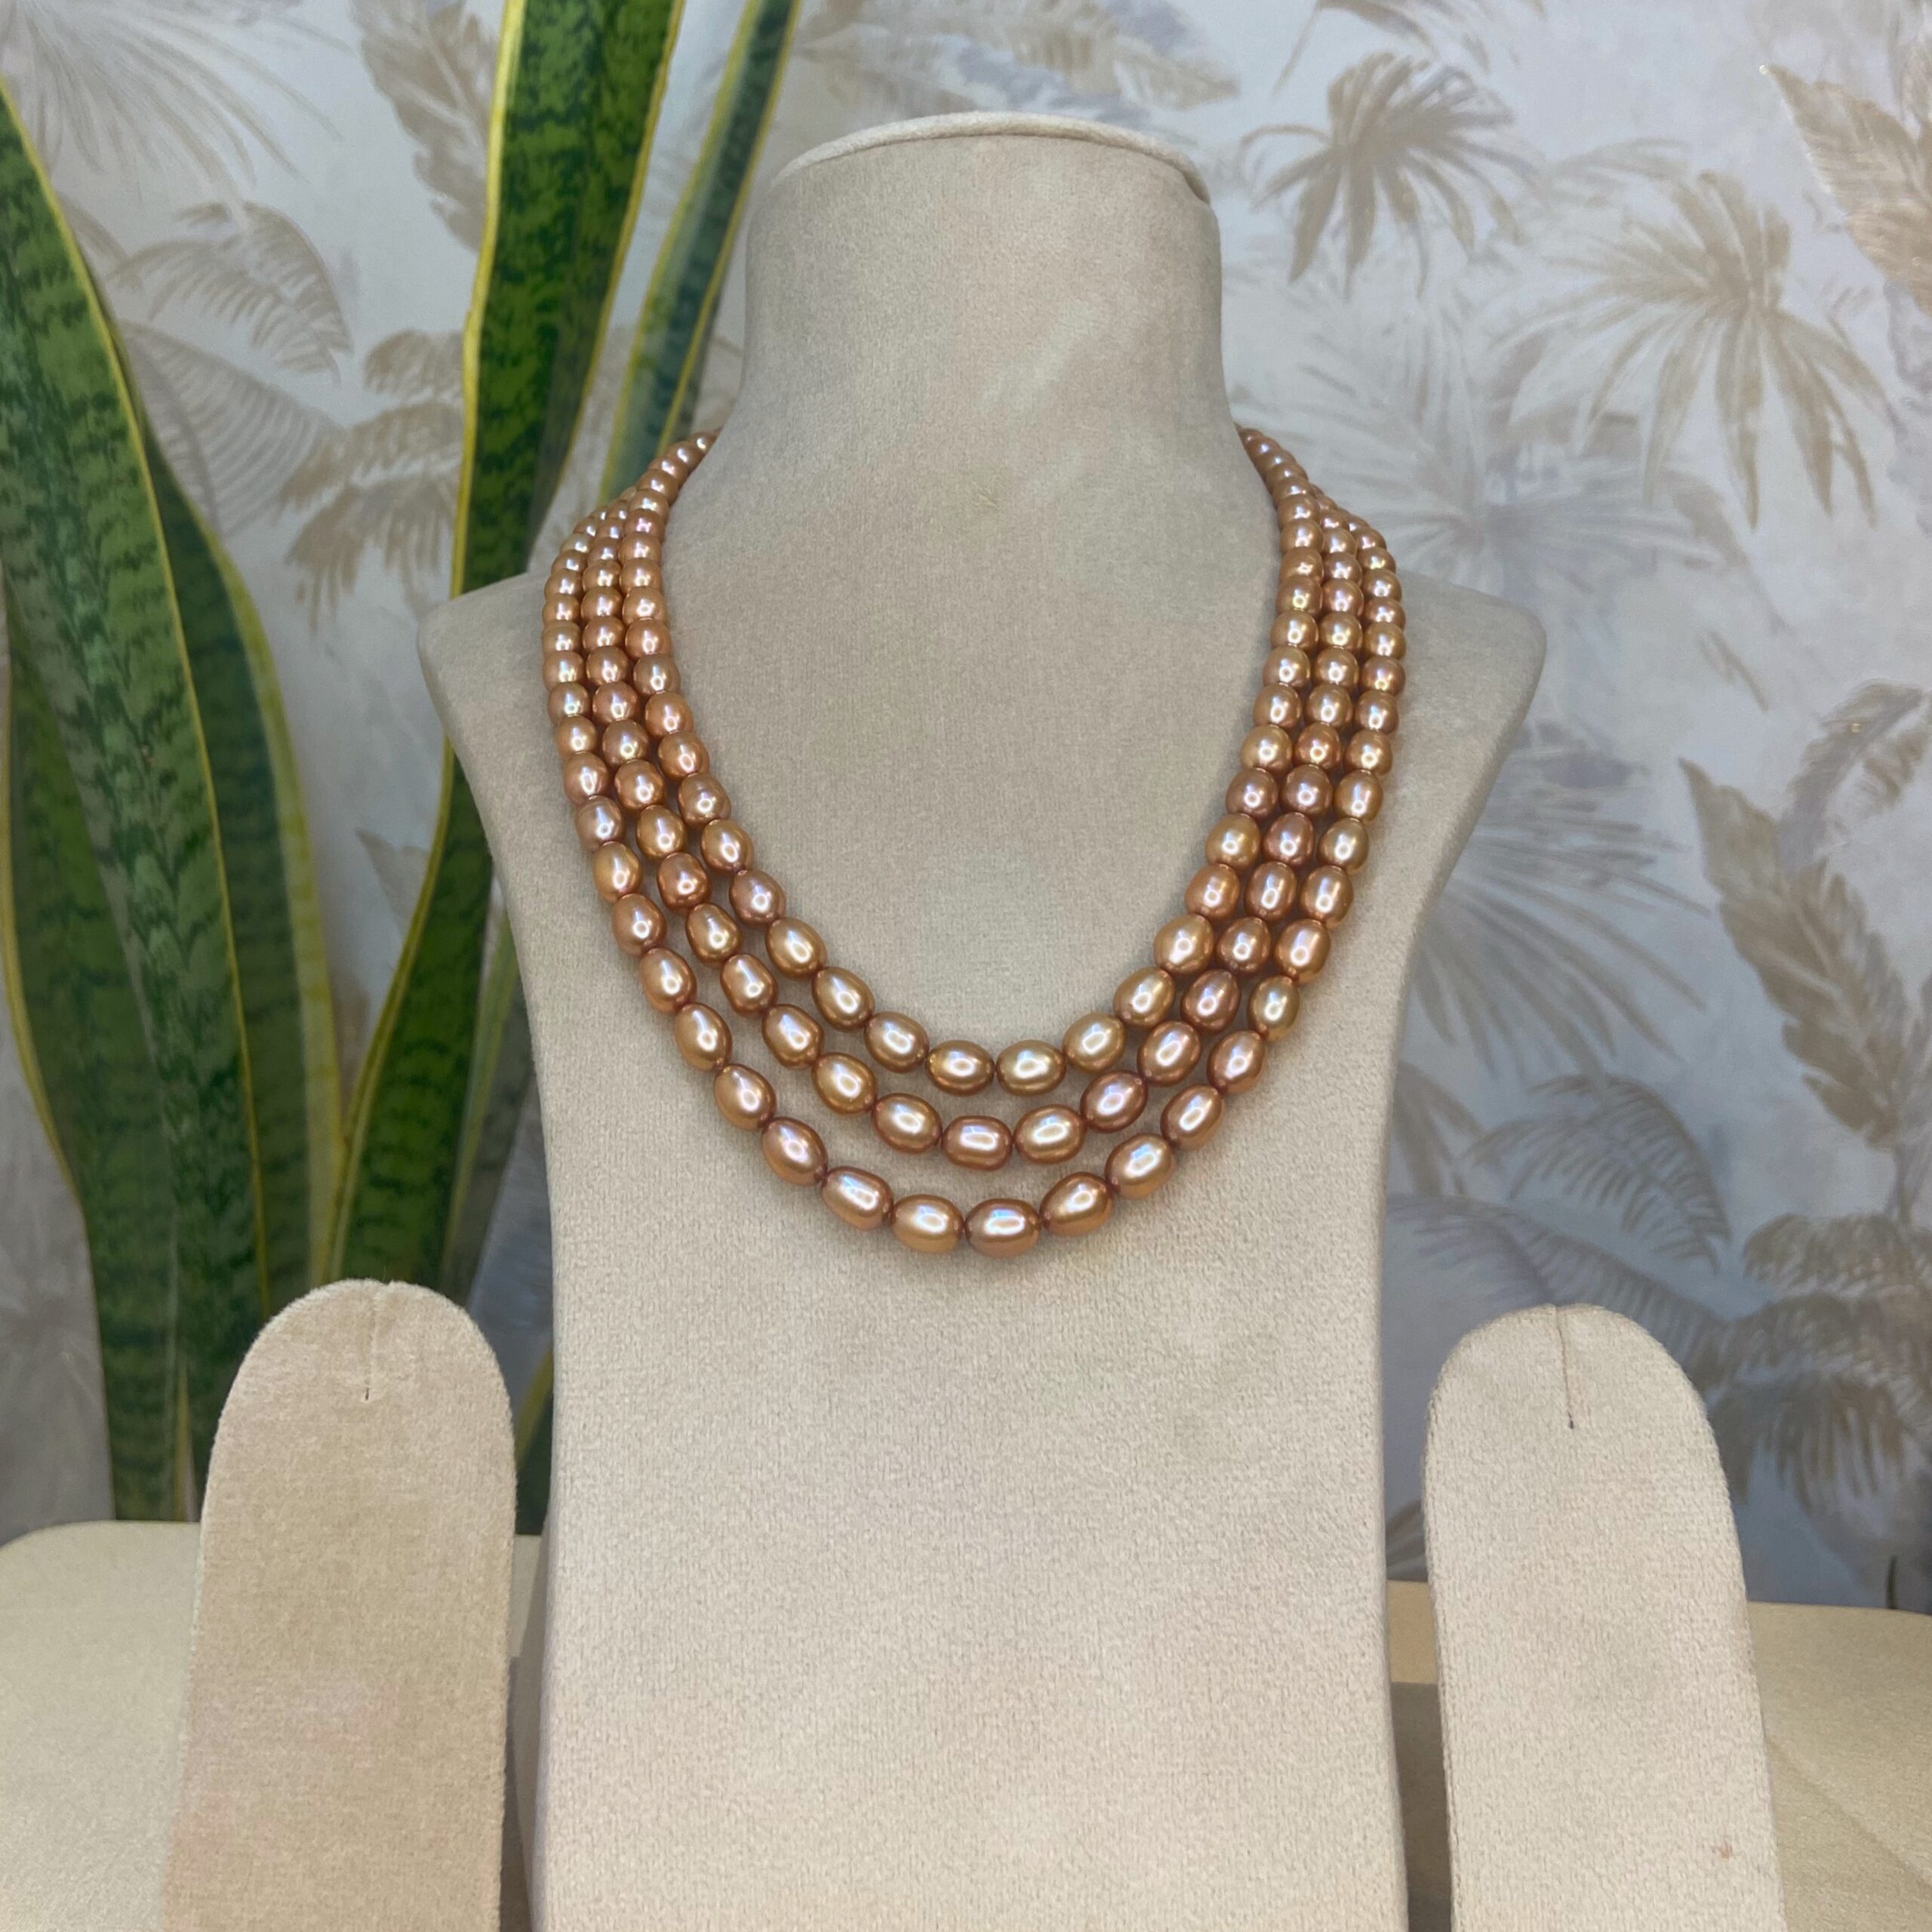 Buy Birrds Golden Pearls Necklace by DIVYA CHUGH at Ogaan Market Online  Shopping Site